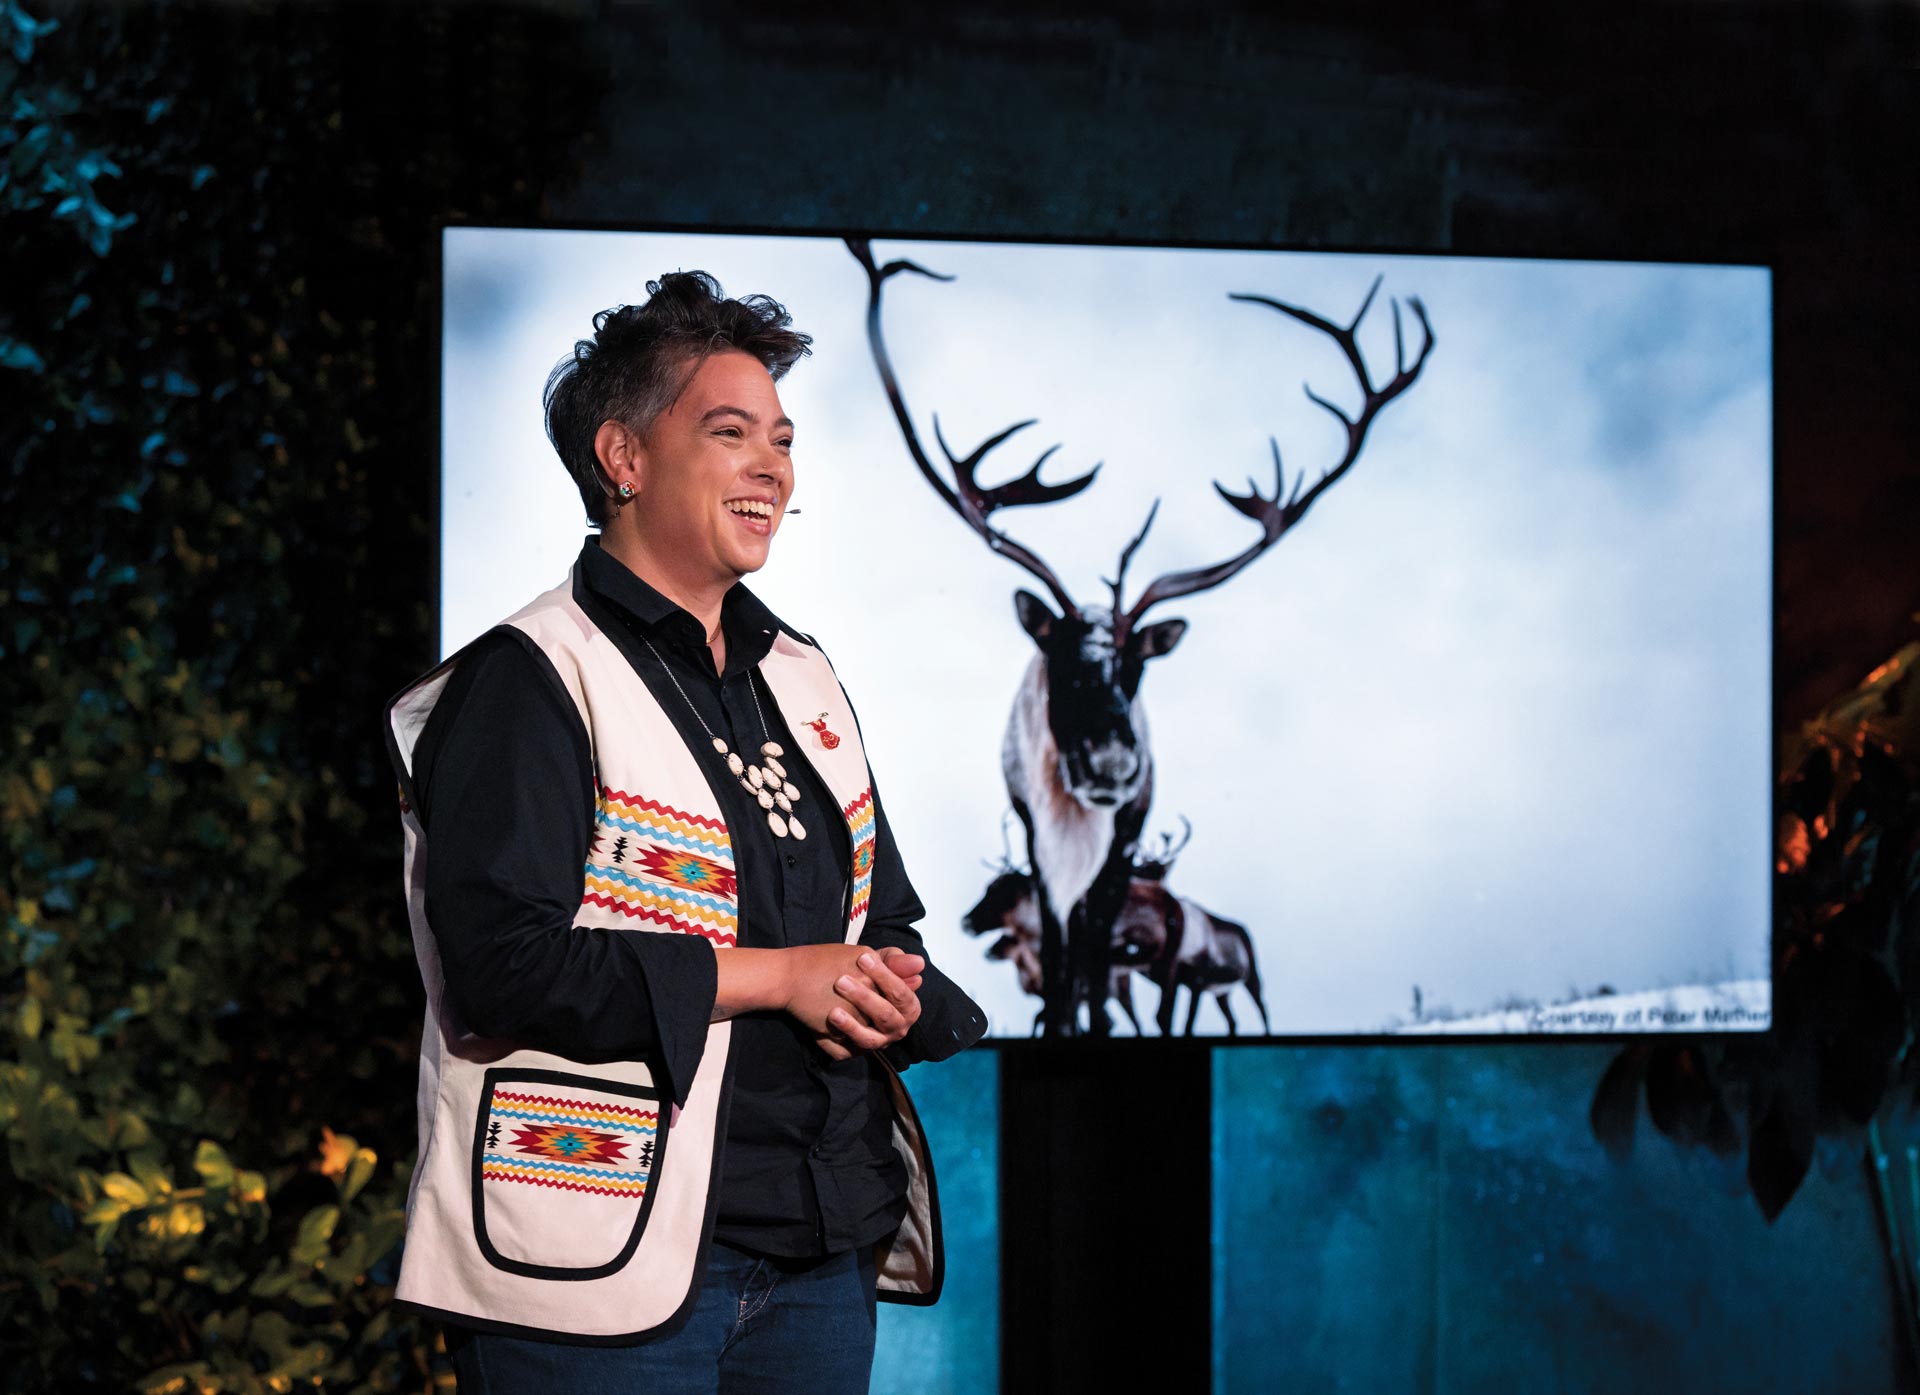 An Innu woman wearing a white patterned vest stands in front of a projector screen on a stage. On the screen is a photograph of a herd of caribou with long elaborate horns.